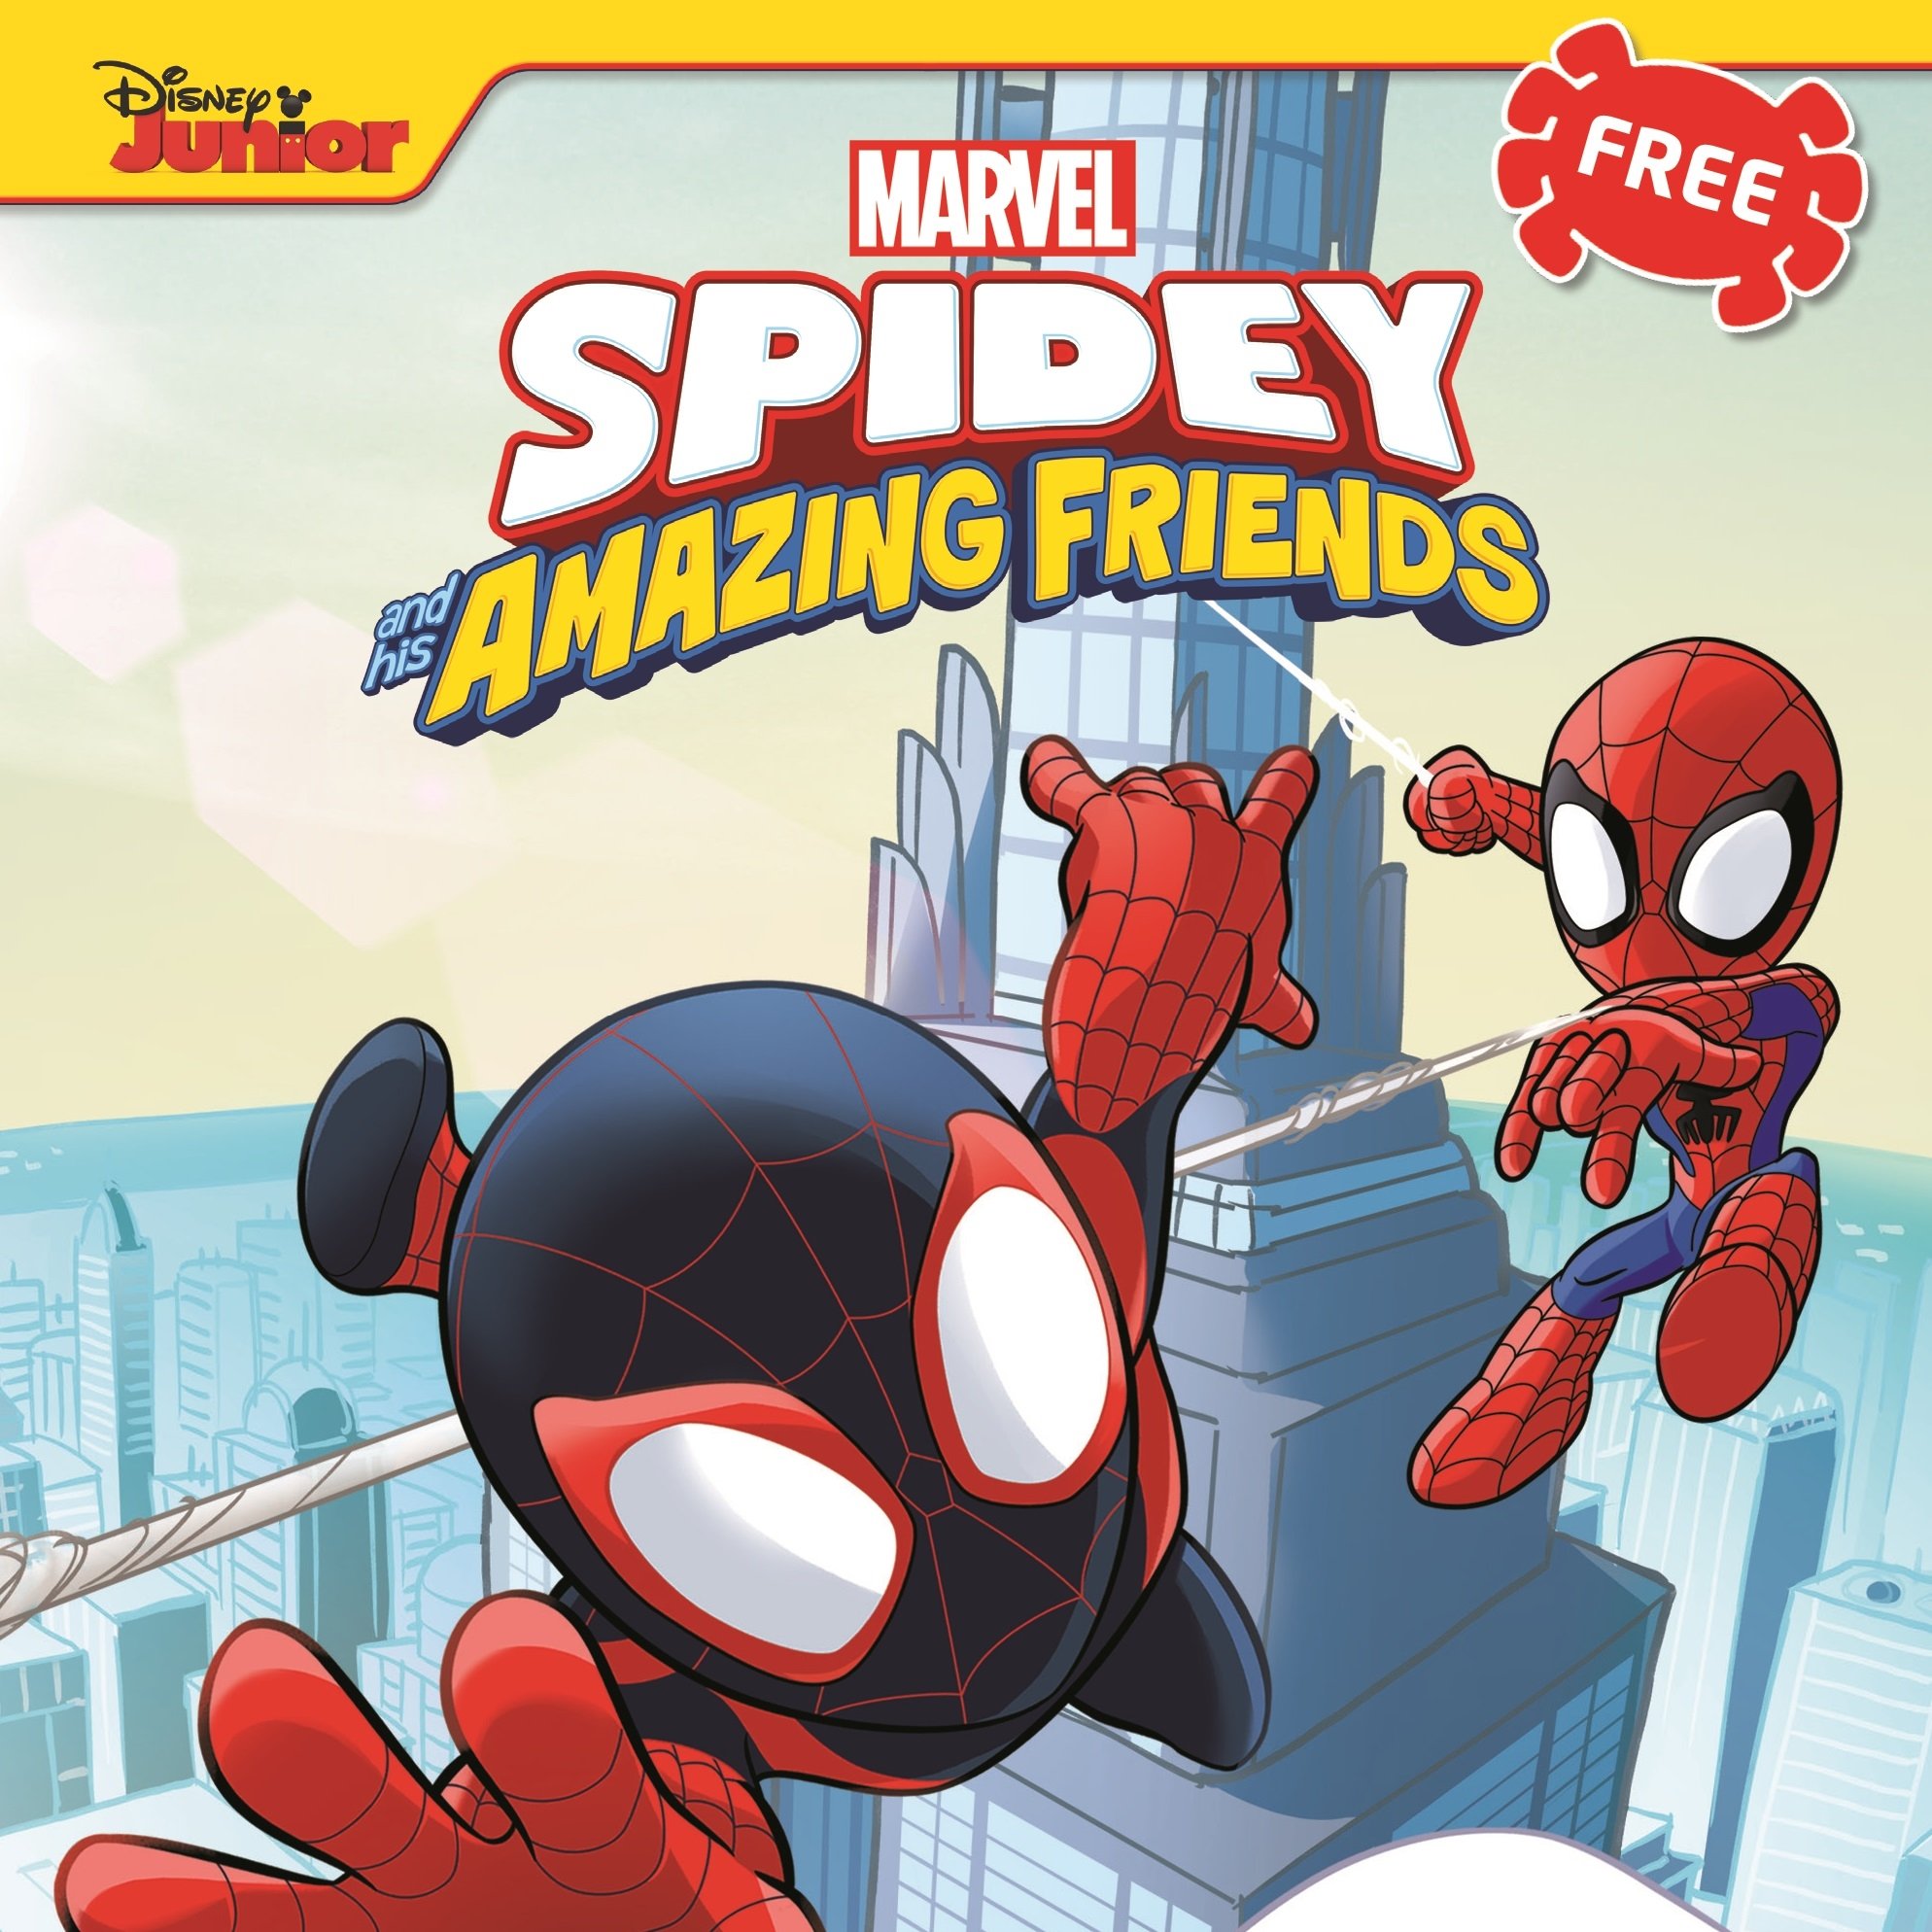 https://www.the360mag.com/wp-content/uploads/2022/02/Spidey_AmazingFriends_Cover.jpg